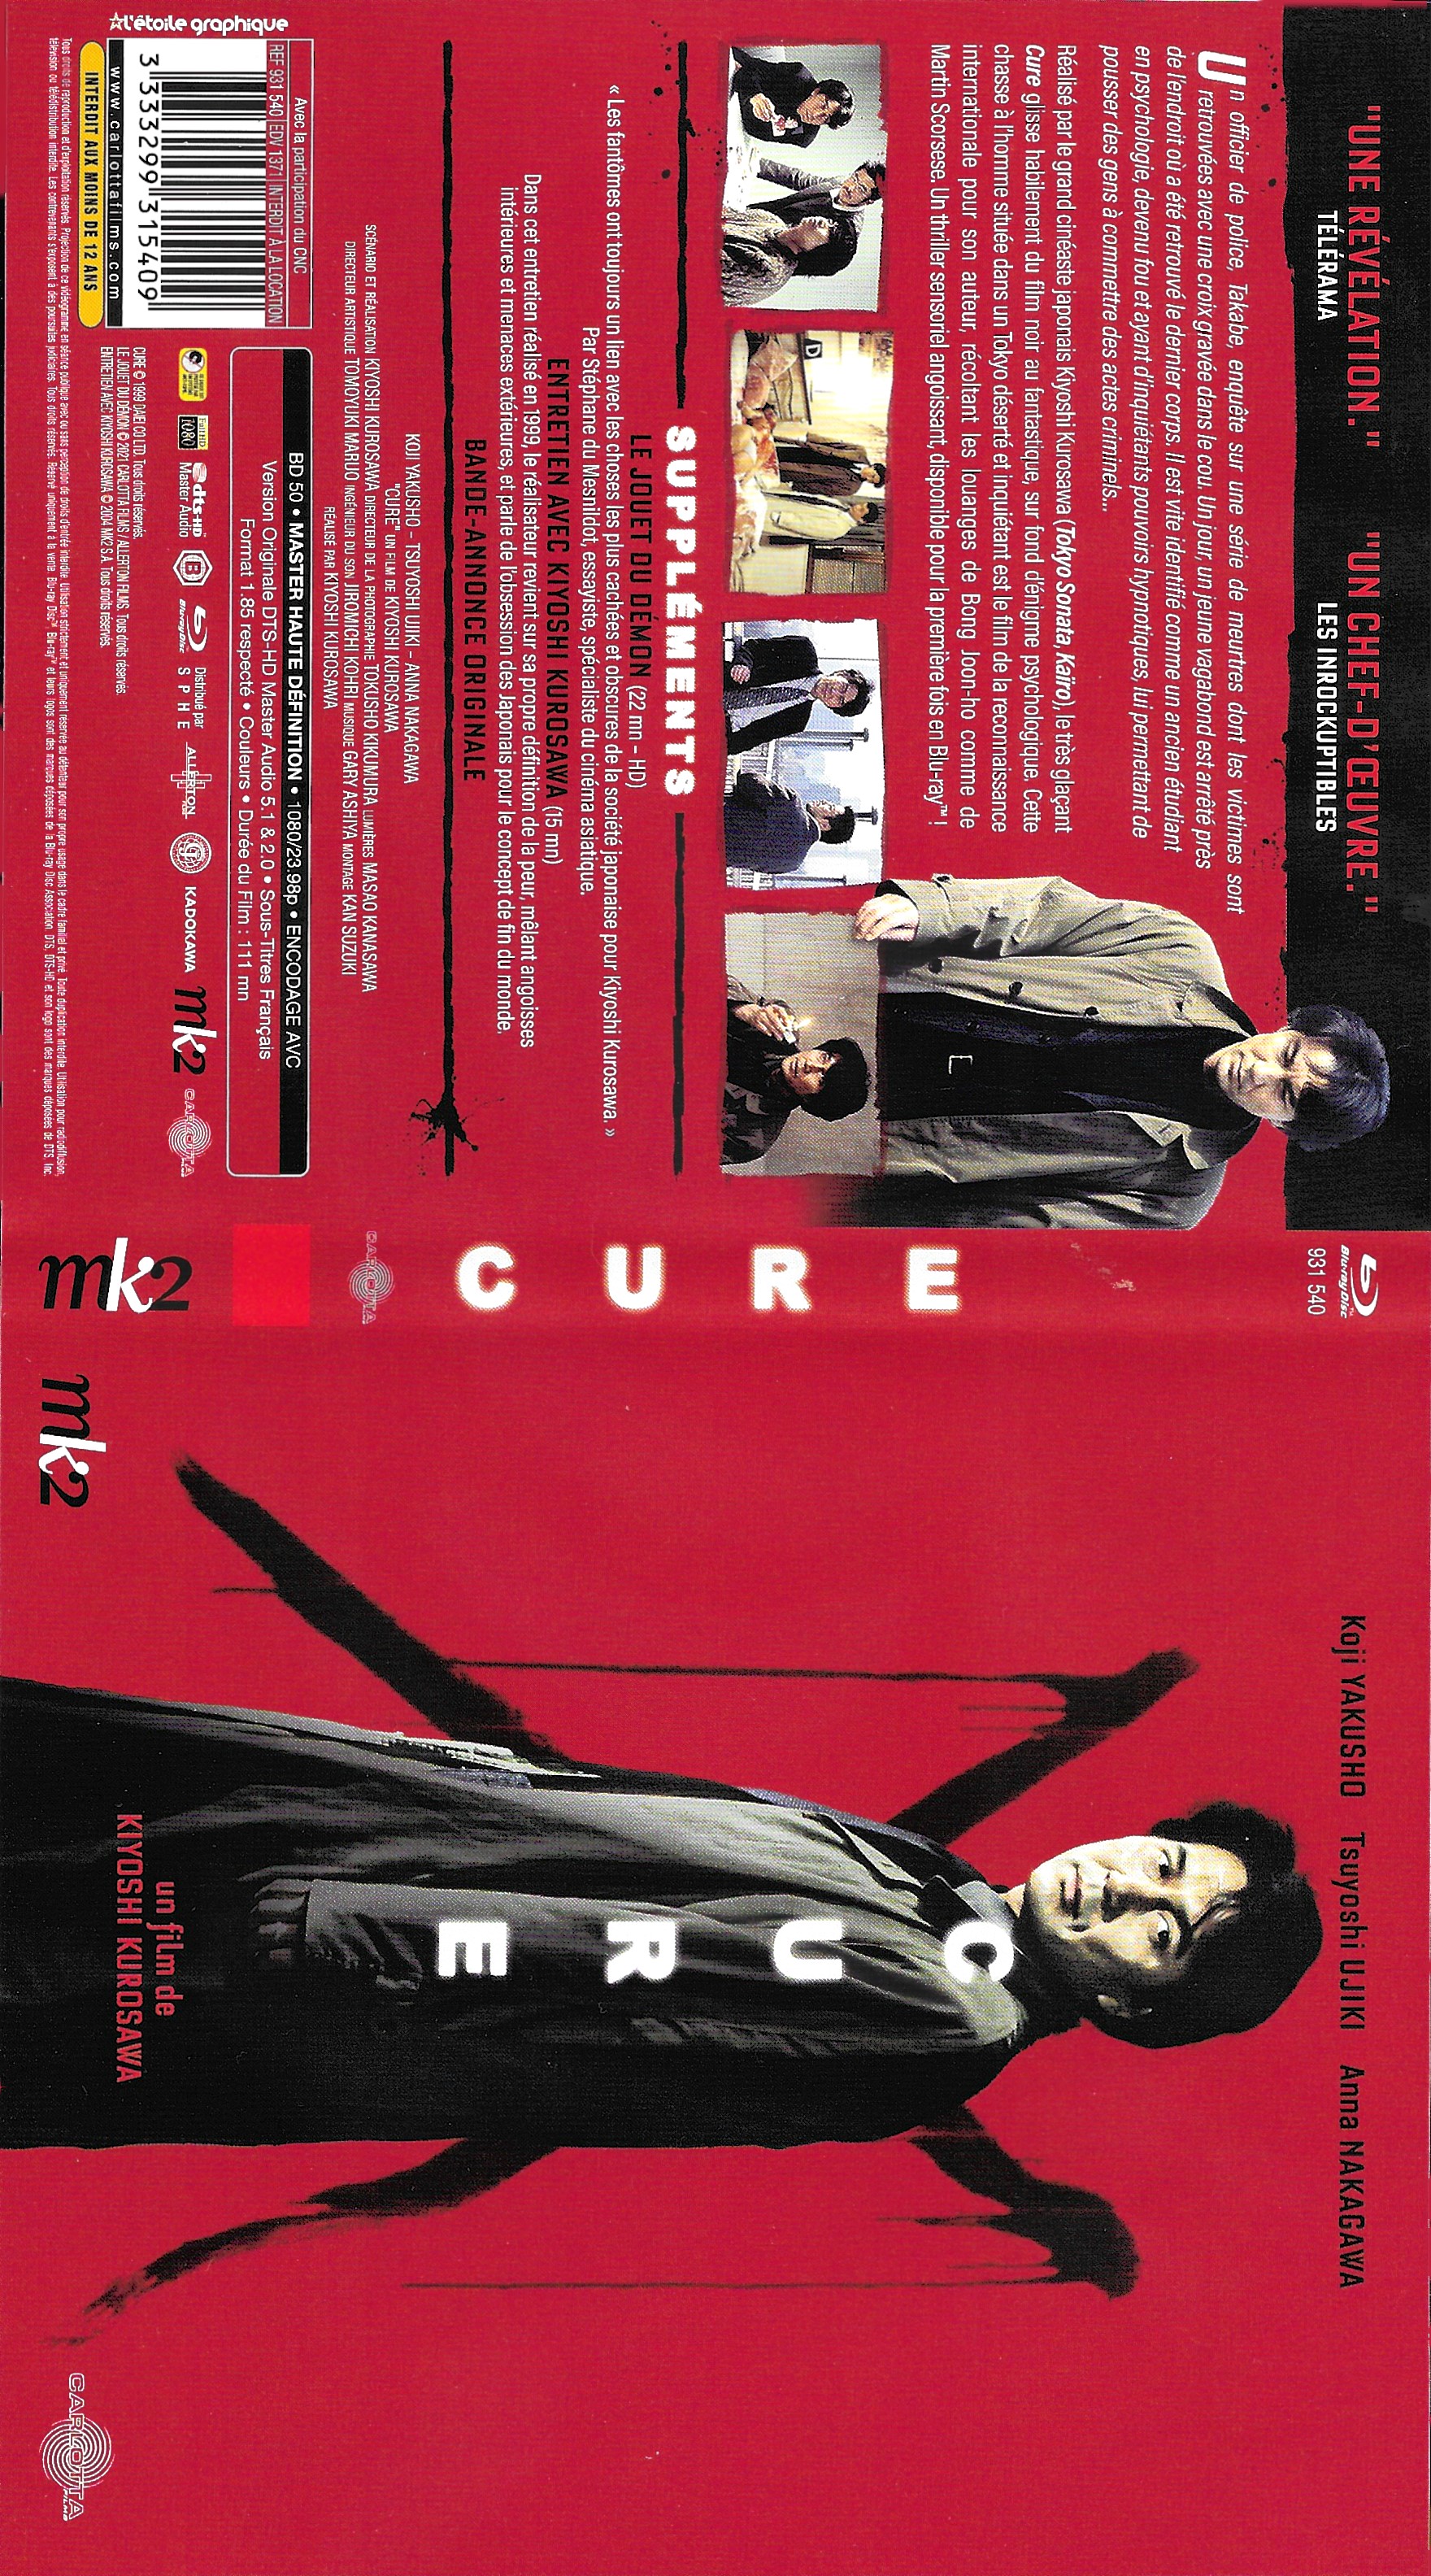 Jaquette DVD Cure (BLU-RAY)